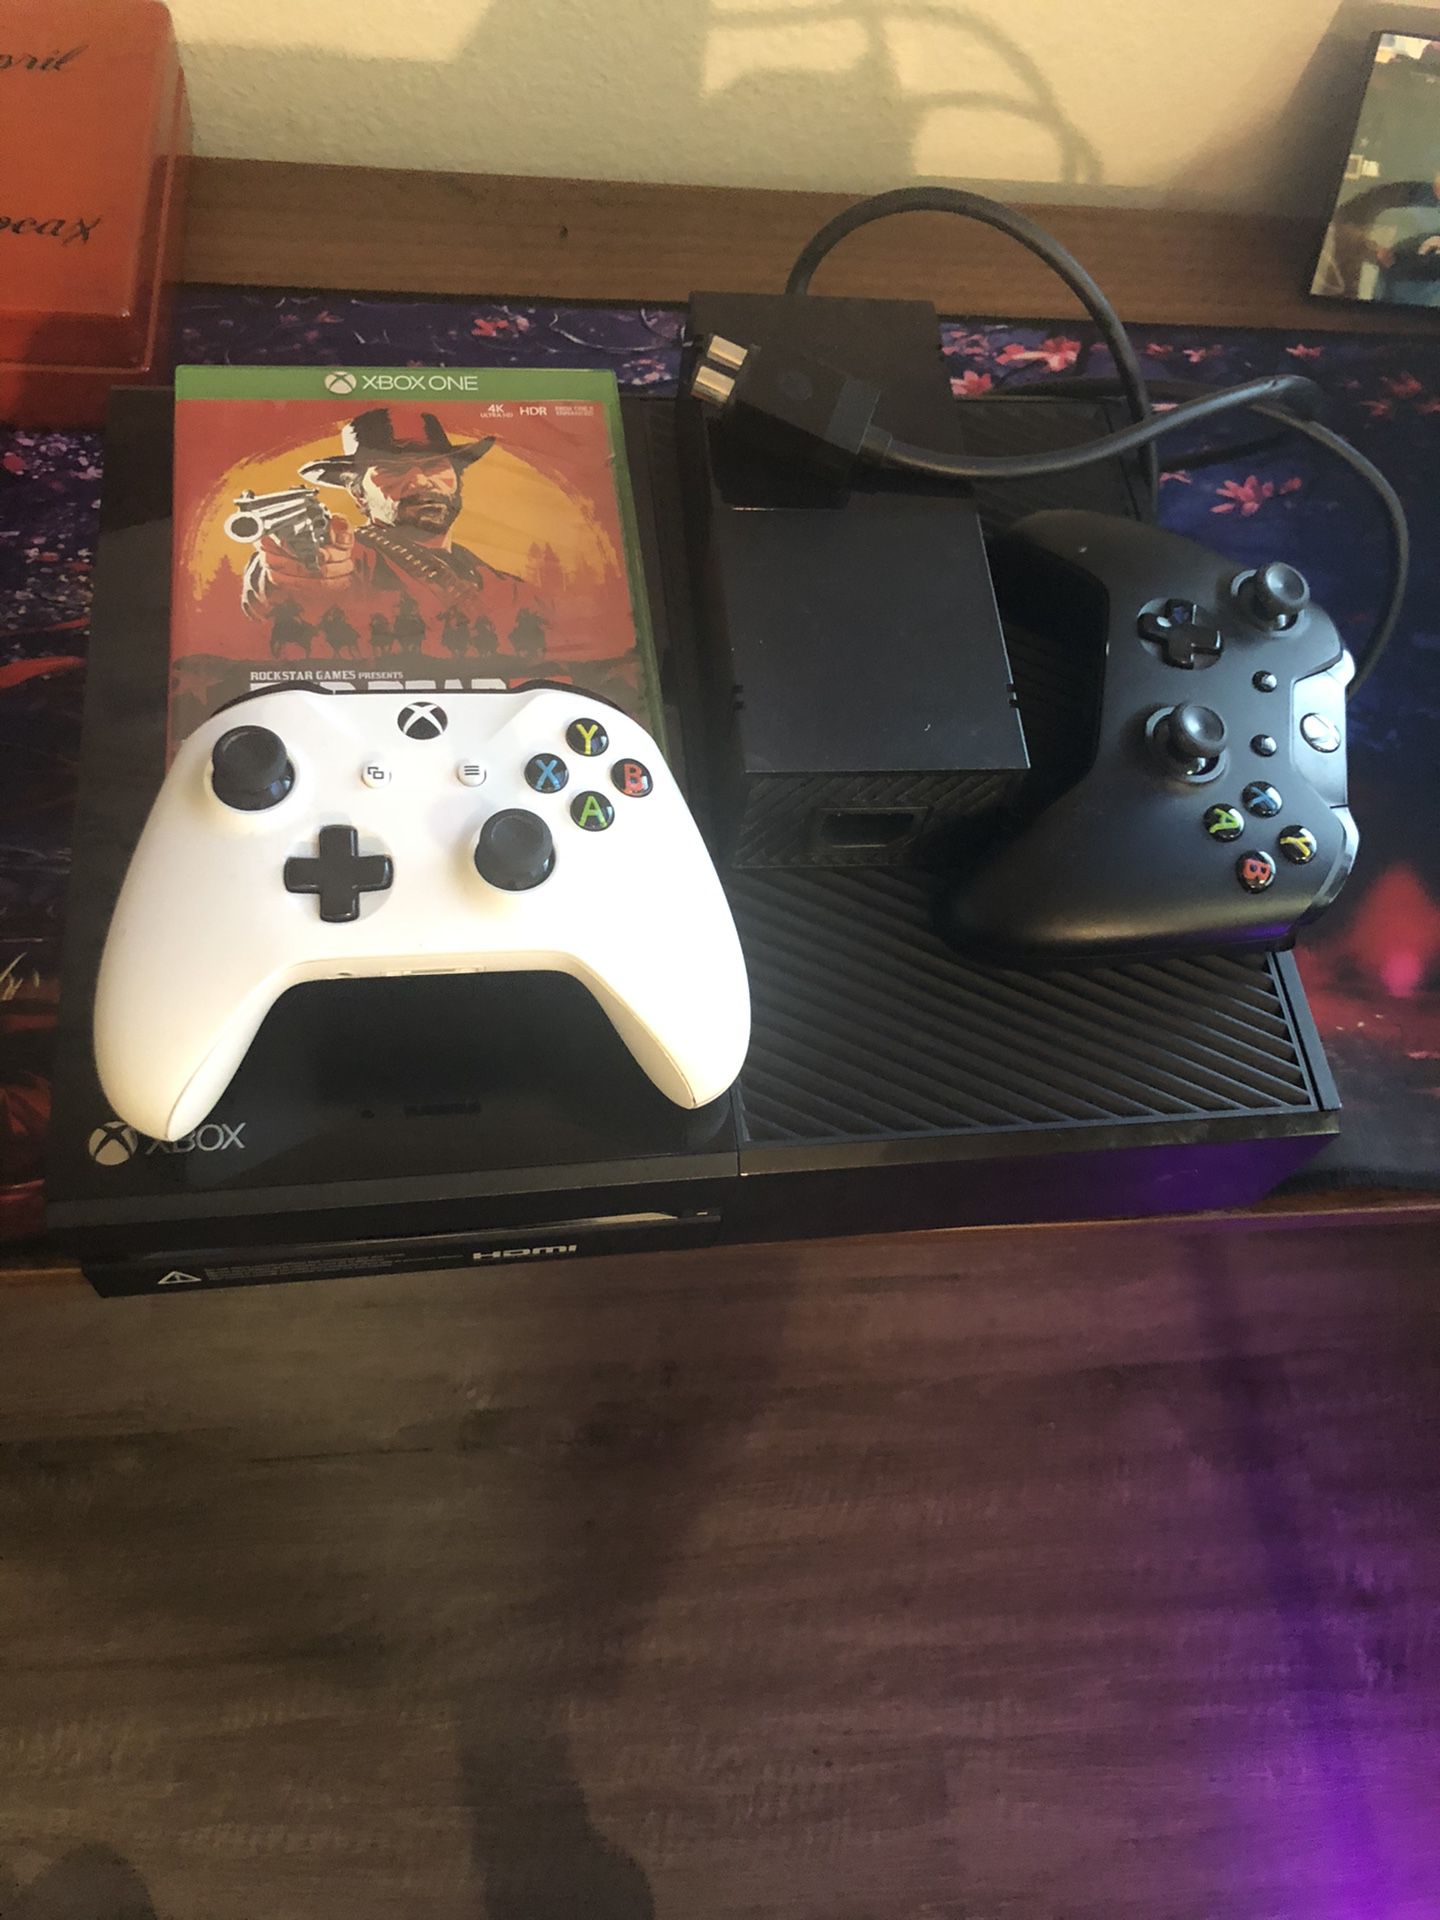 Xbox one with two controls and RDR2. Trade for PS4 pro. I don’t need games etc just the unit. OBO